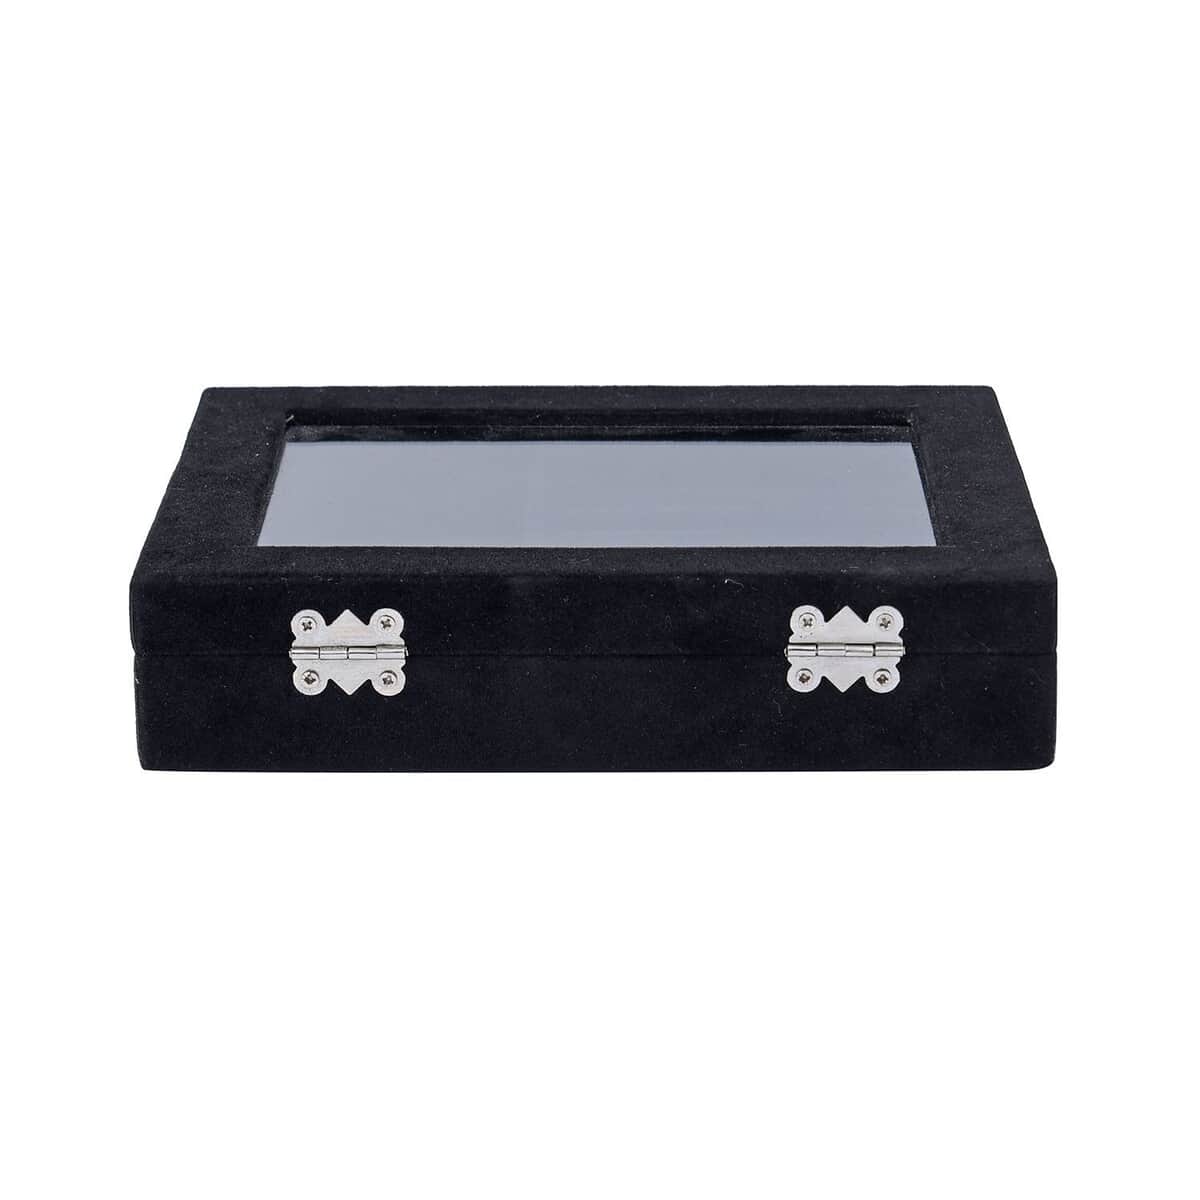 Black Velvet Jewelry Box with Anti Tarnish Lining & Lock (8x6x2) (Rings Hold Up to 28, Brooch, Pendant, Earrings) image number 3